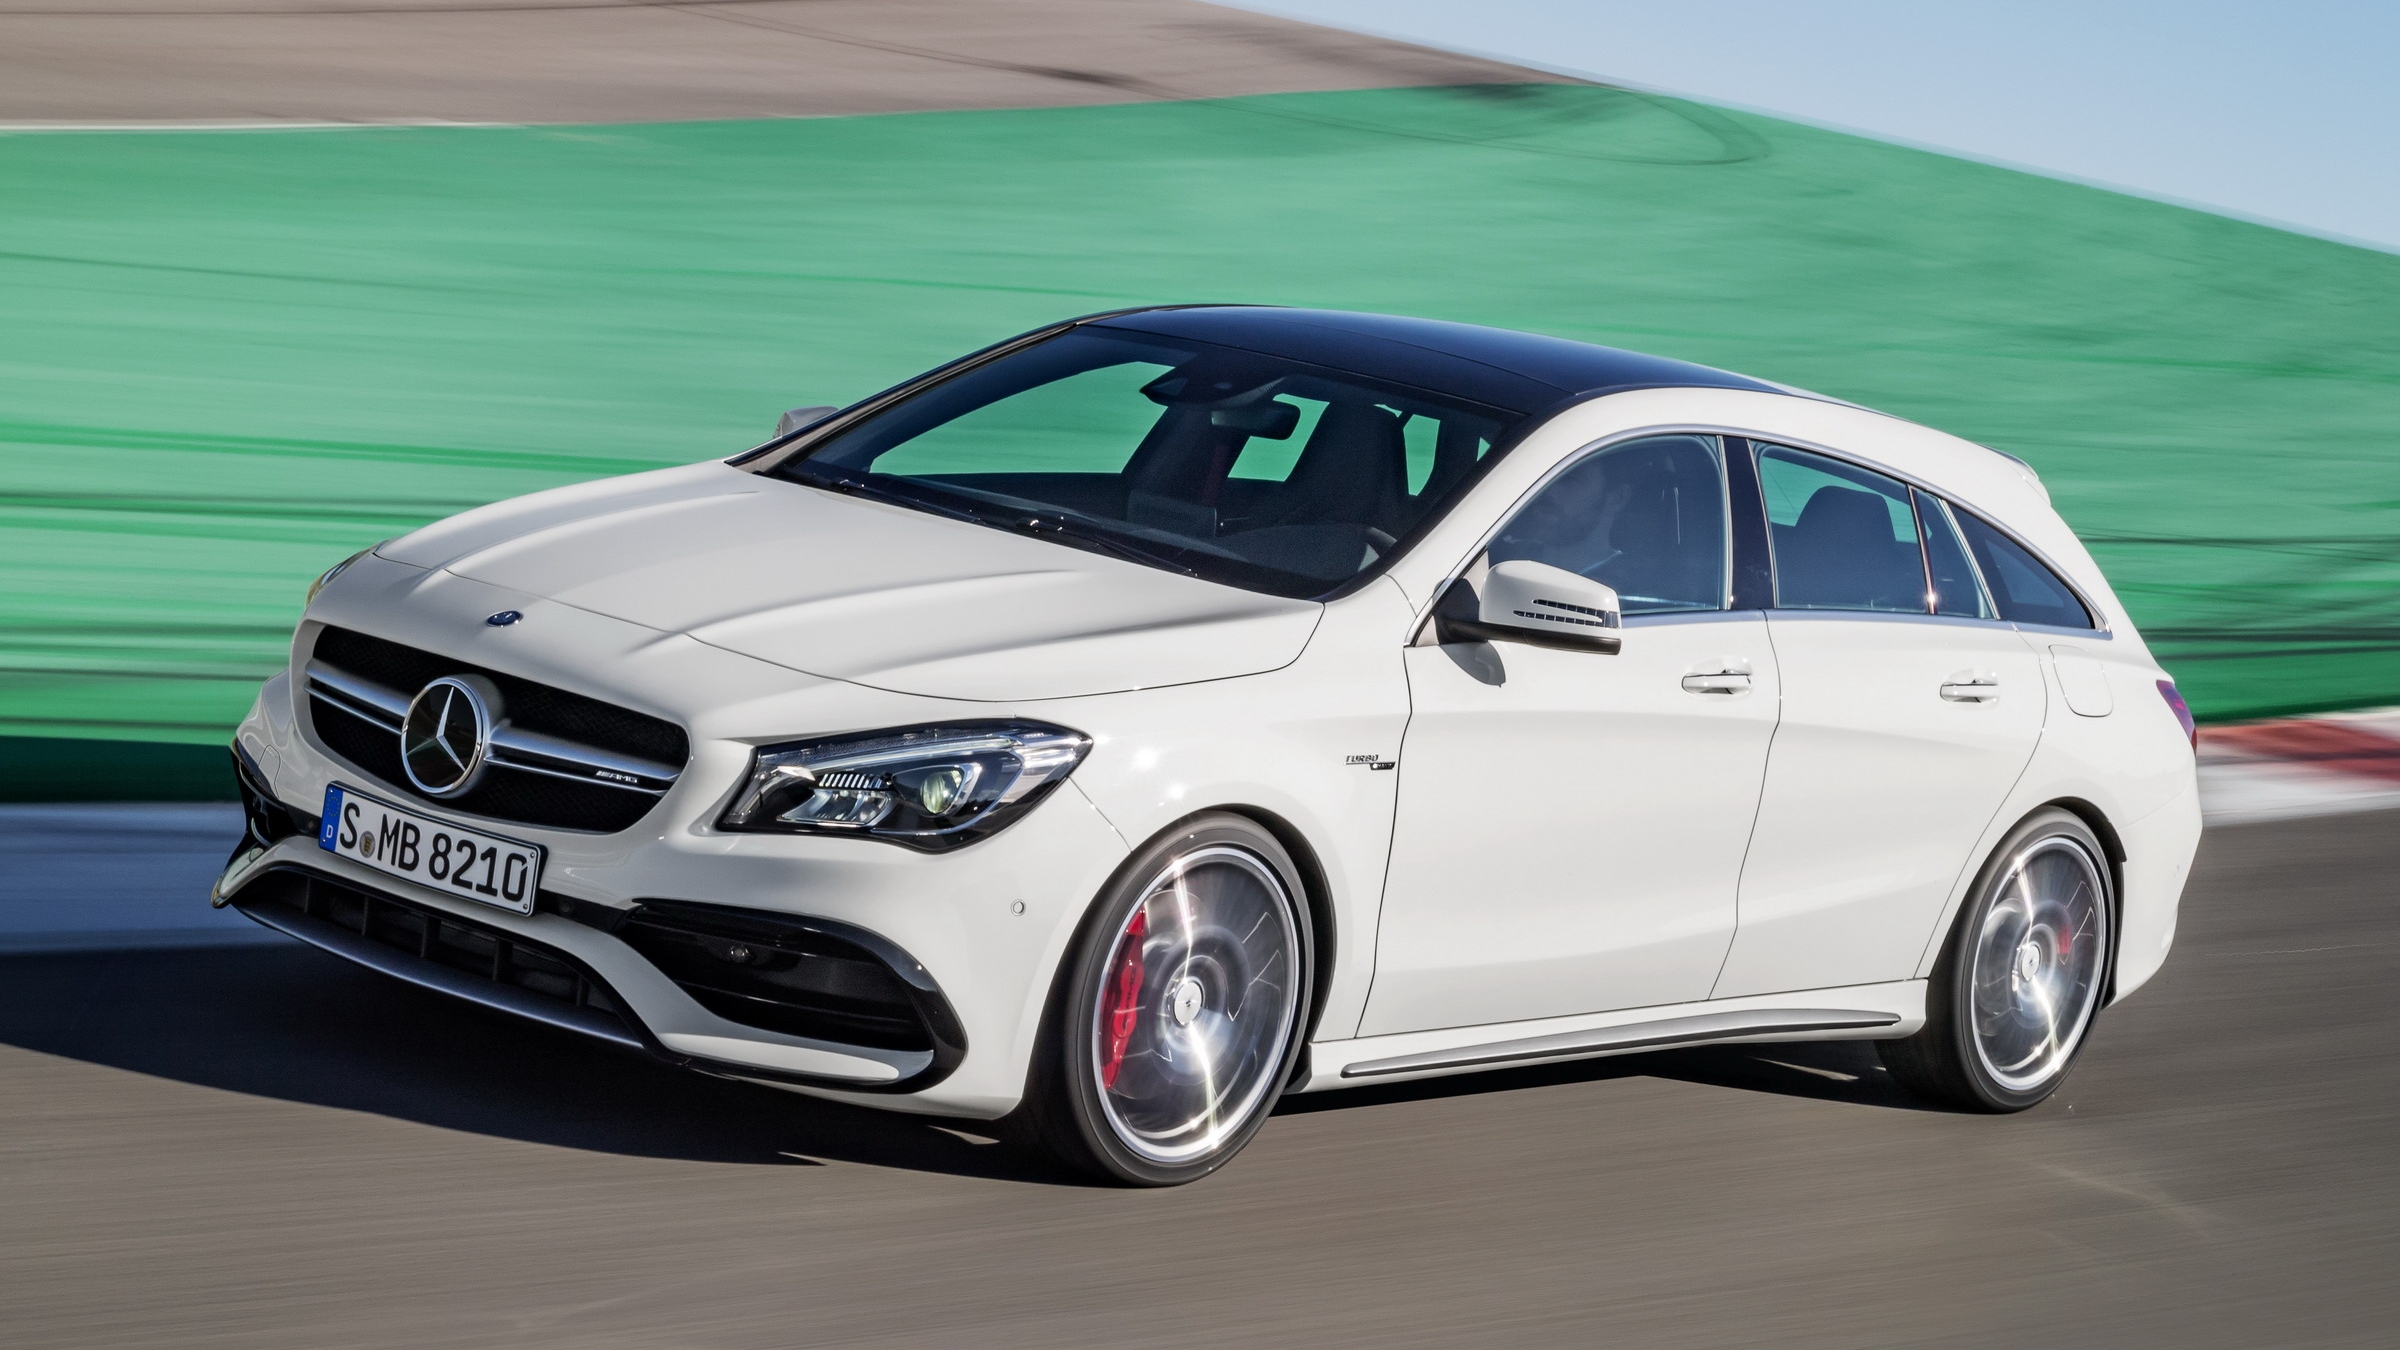 Mercedes AMG CLA45 Shooting Brake Picture, Photo, Wallpaper